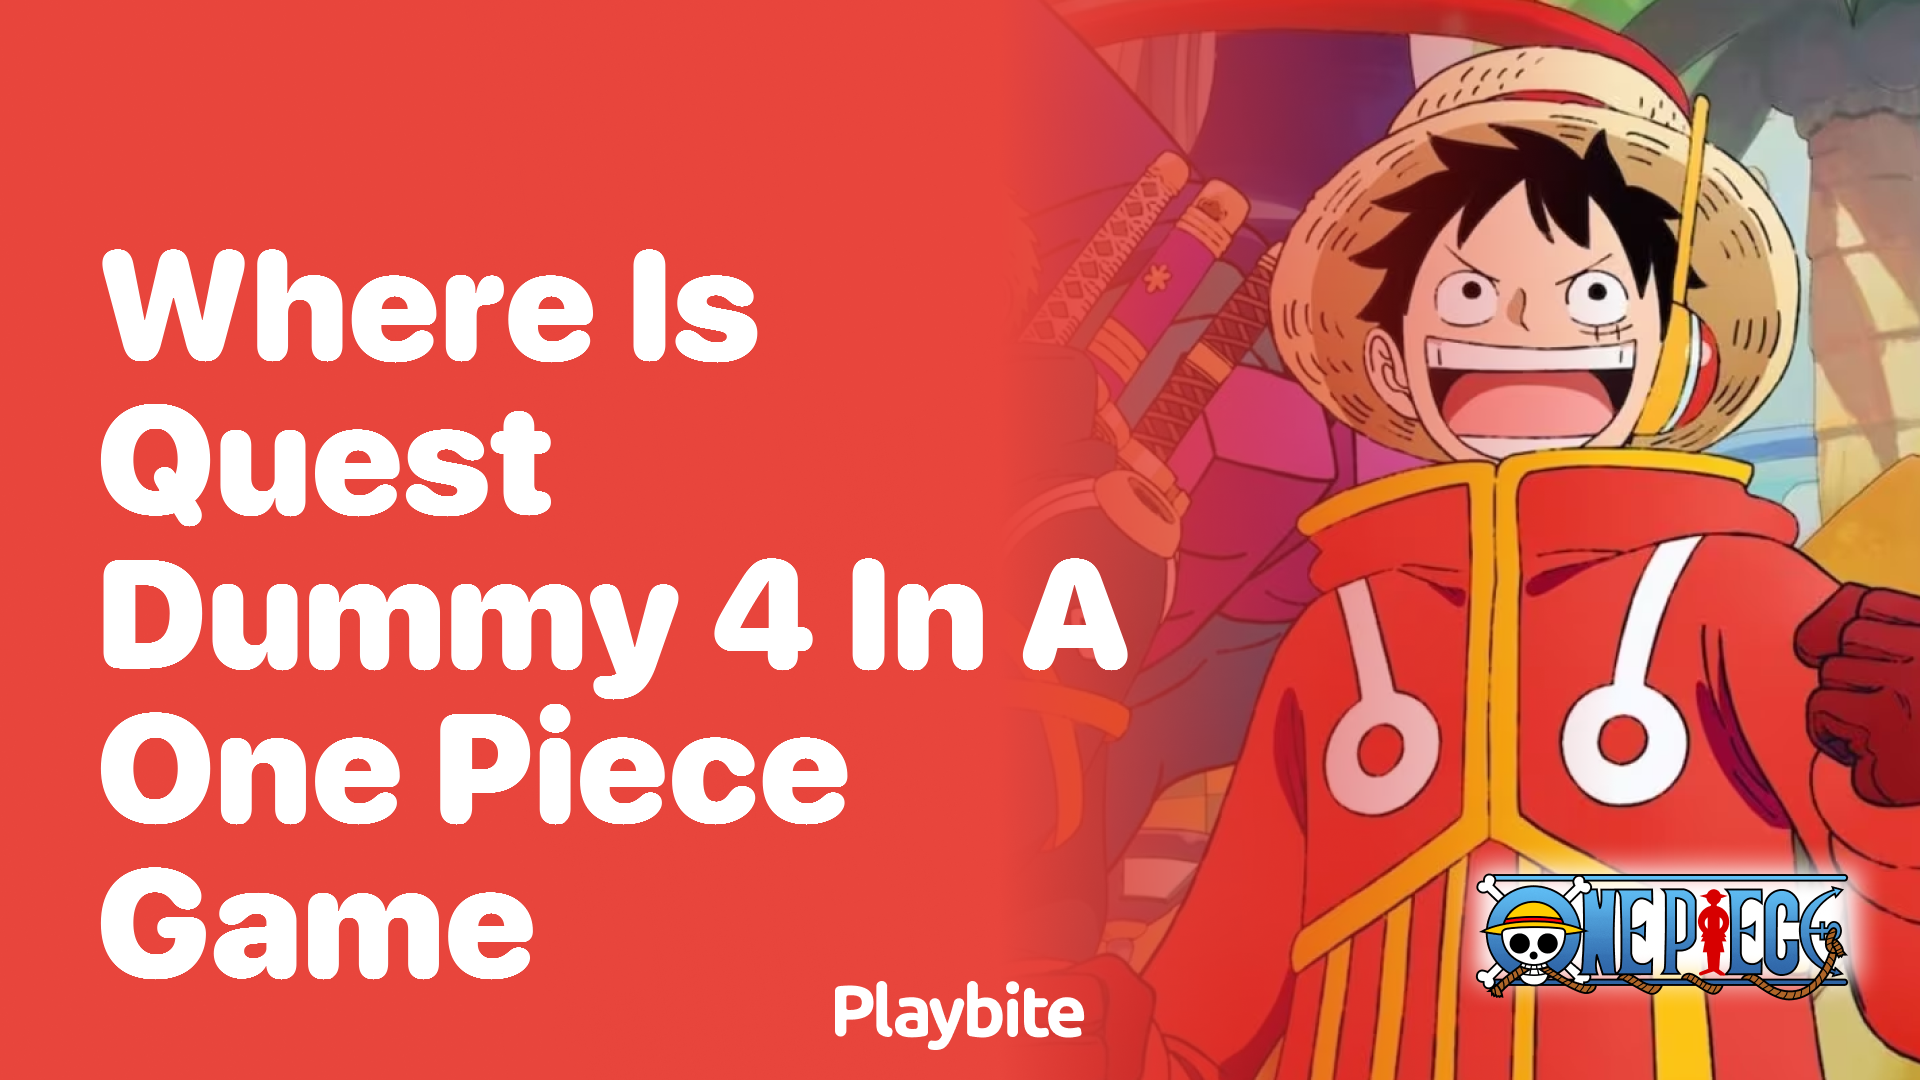 Where Is Quest Dummy 4 in a One Piece Game? - Playbite